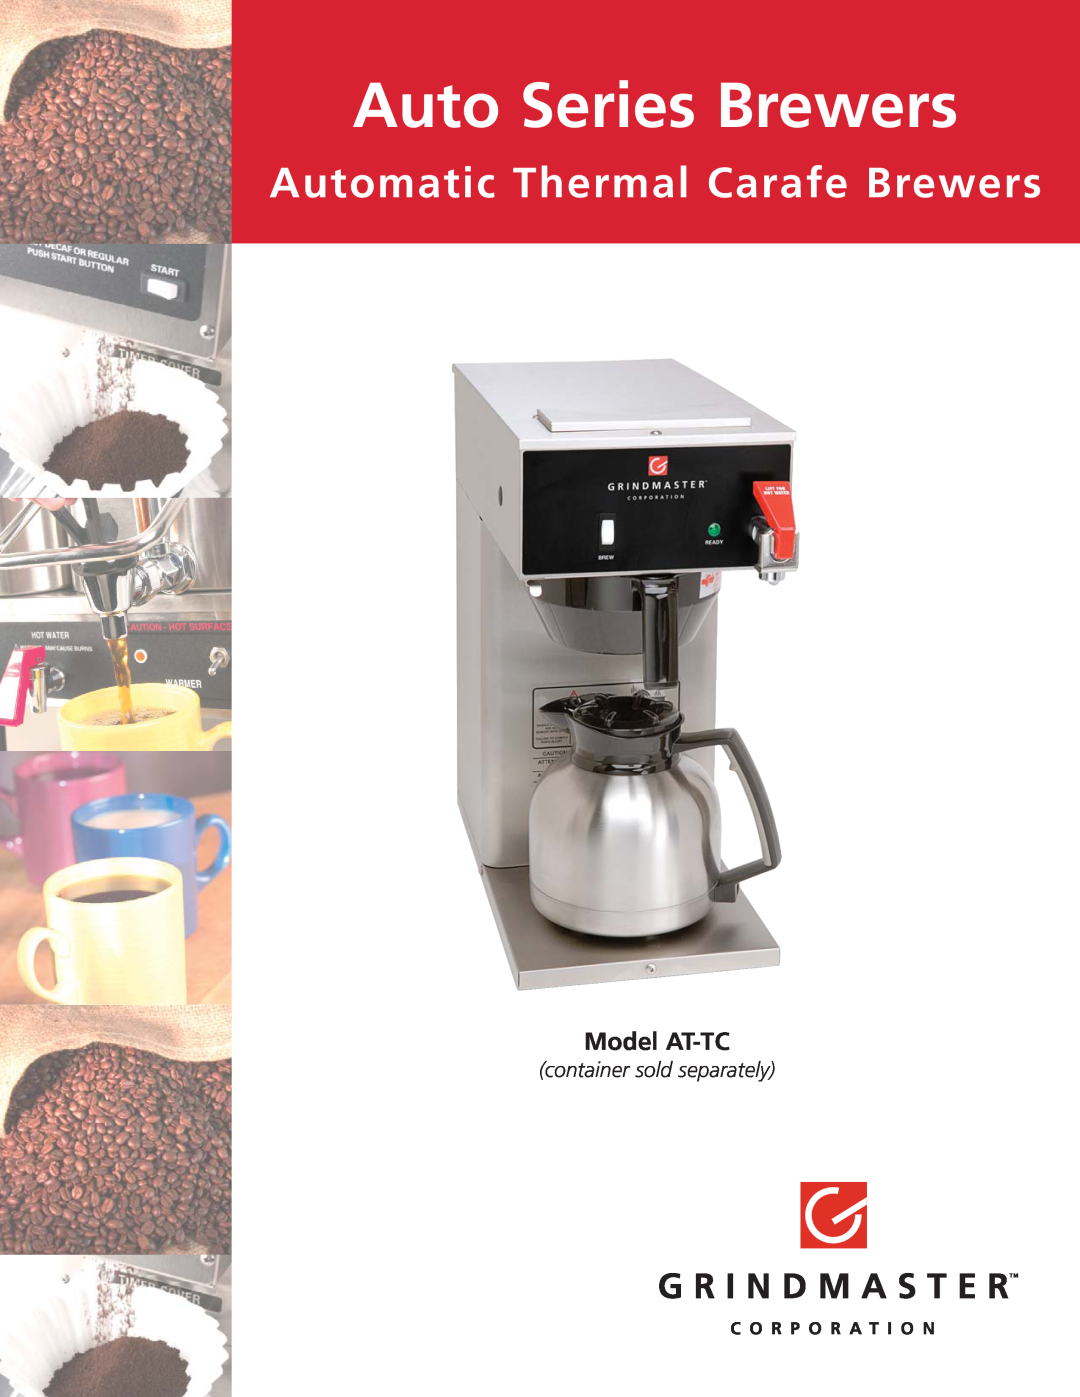 Grindmaster manual Auto Series Brewers, Automatic Thermal Carafe Brewers, Model AT-TC, container sold separately 